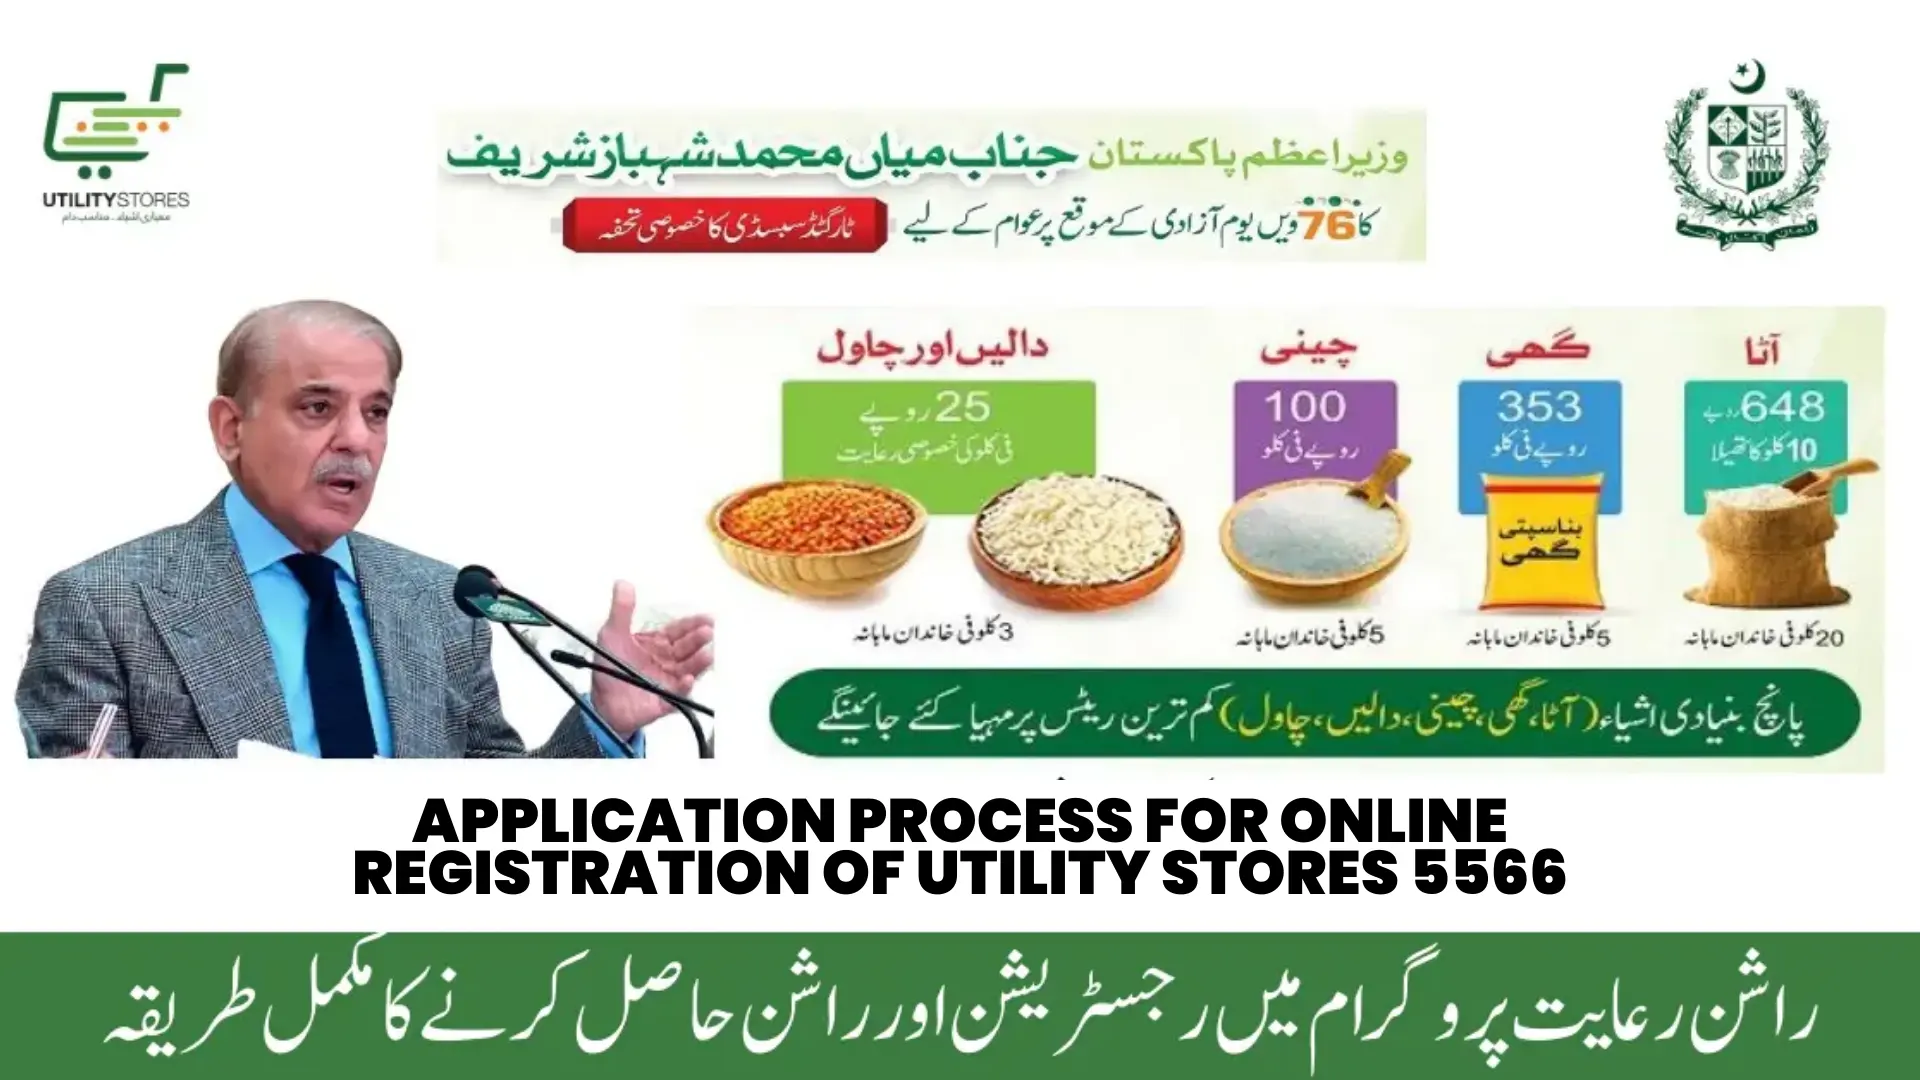 Application process for Online Registration of utility stores 5566